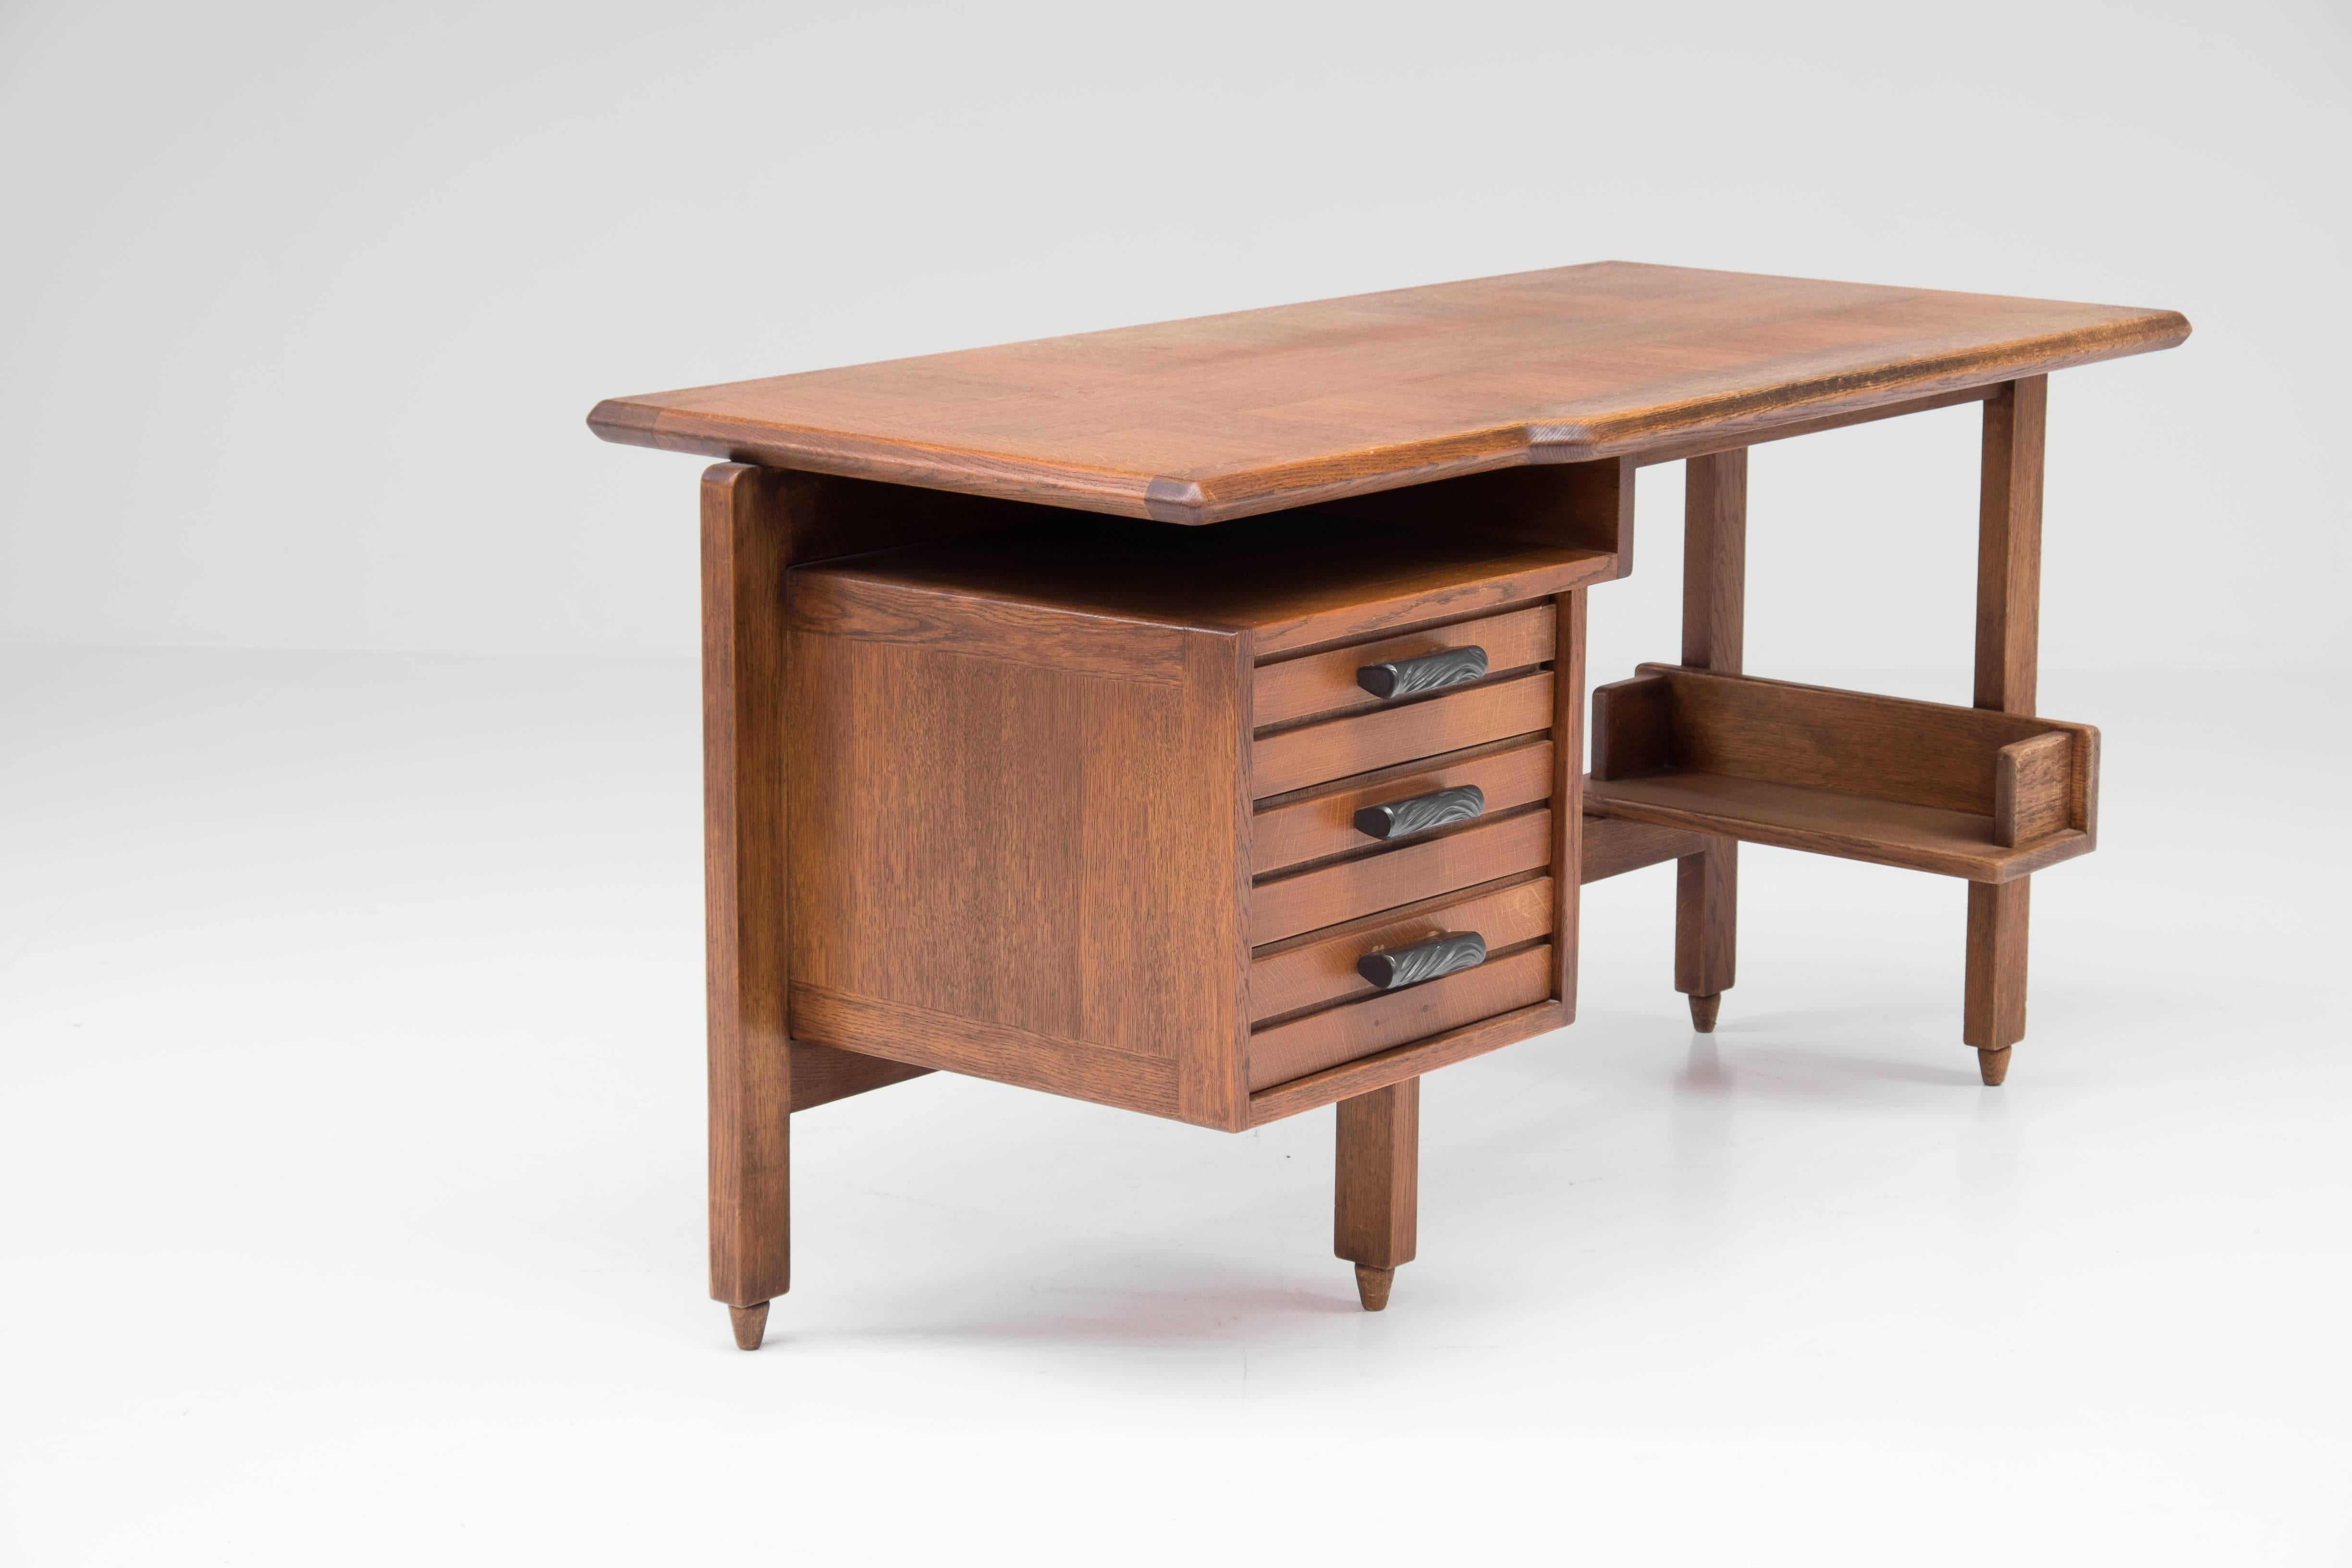 Guillerme et Chambron desk in oak with ceramic drawer pulls for Votre Maison, French, 1960s

Including three Guillerme et Chambron chairs in oak.